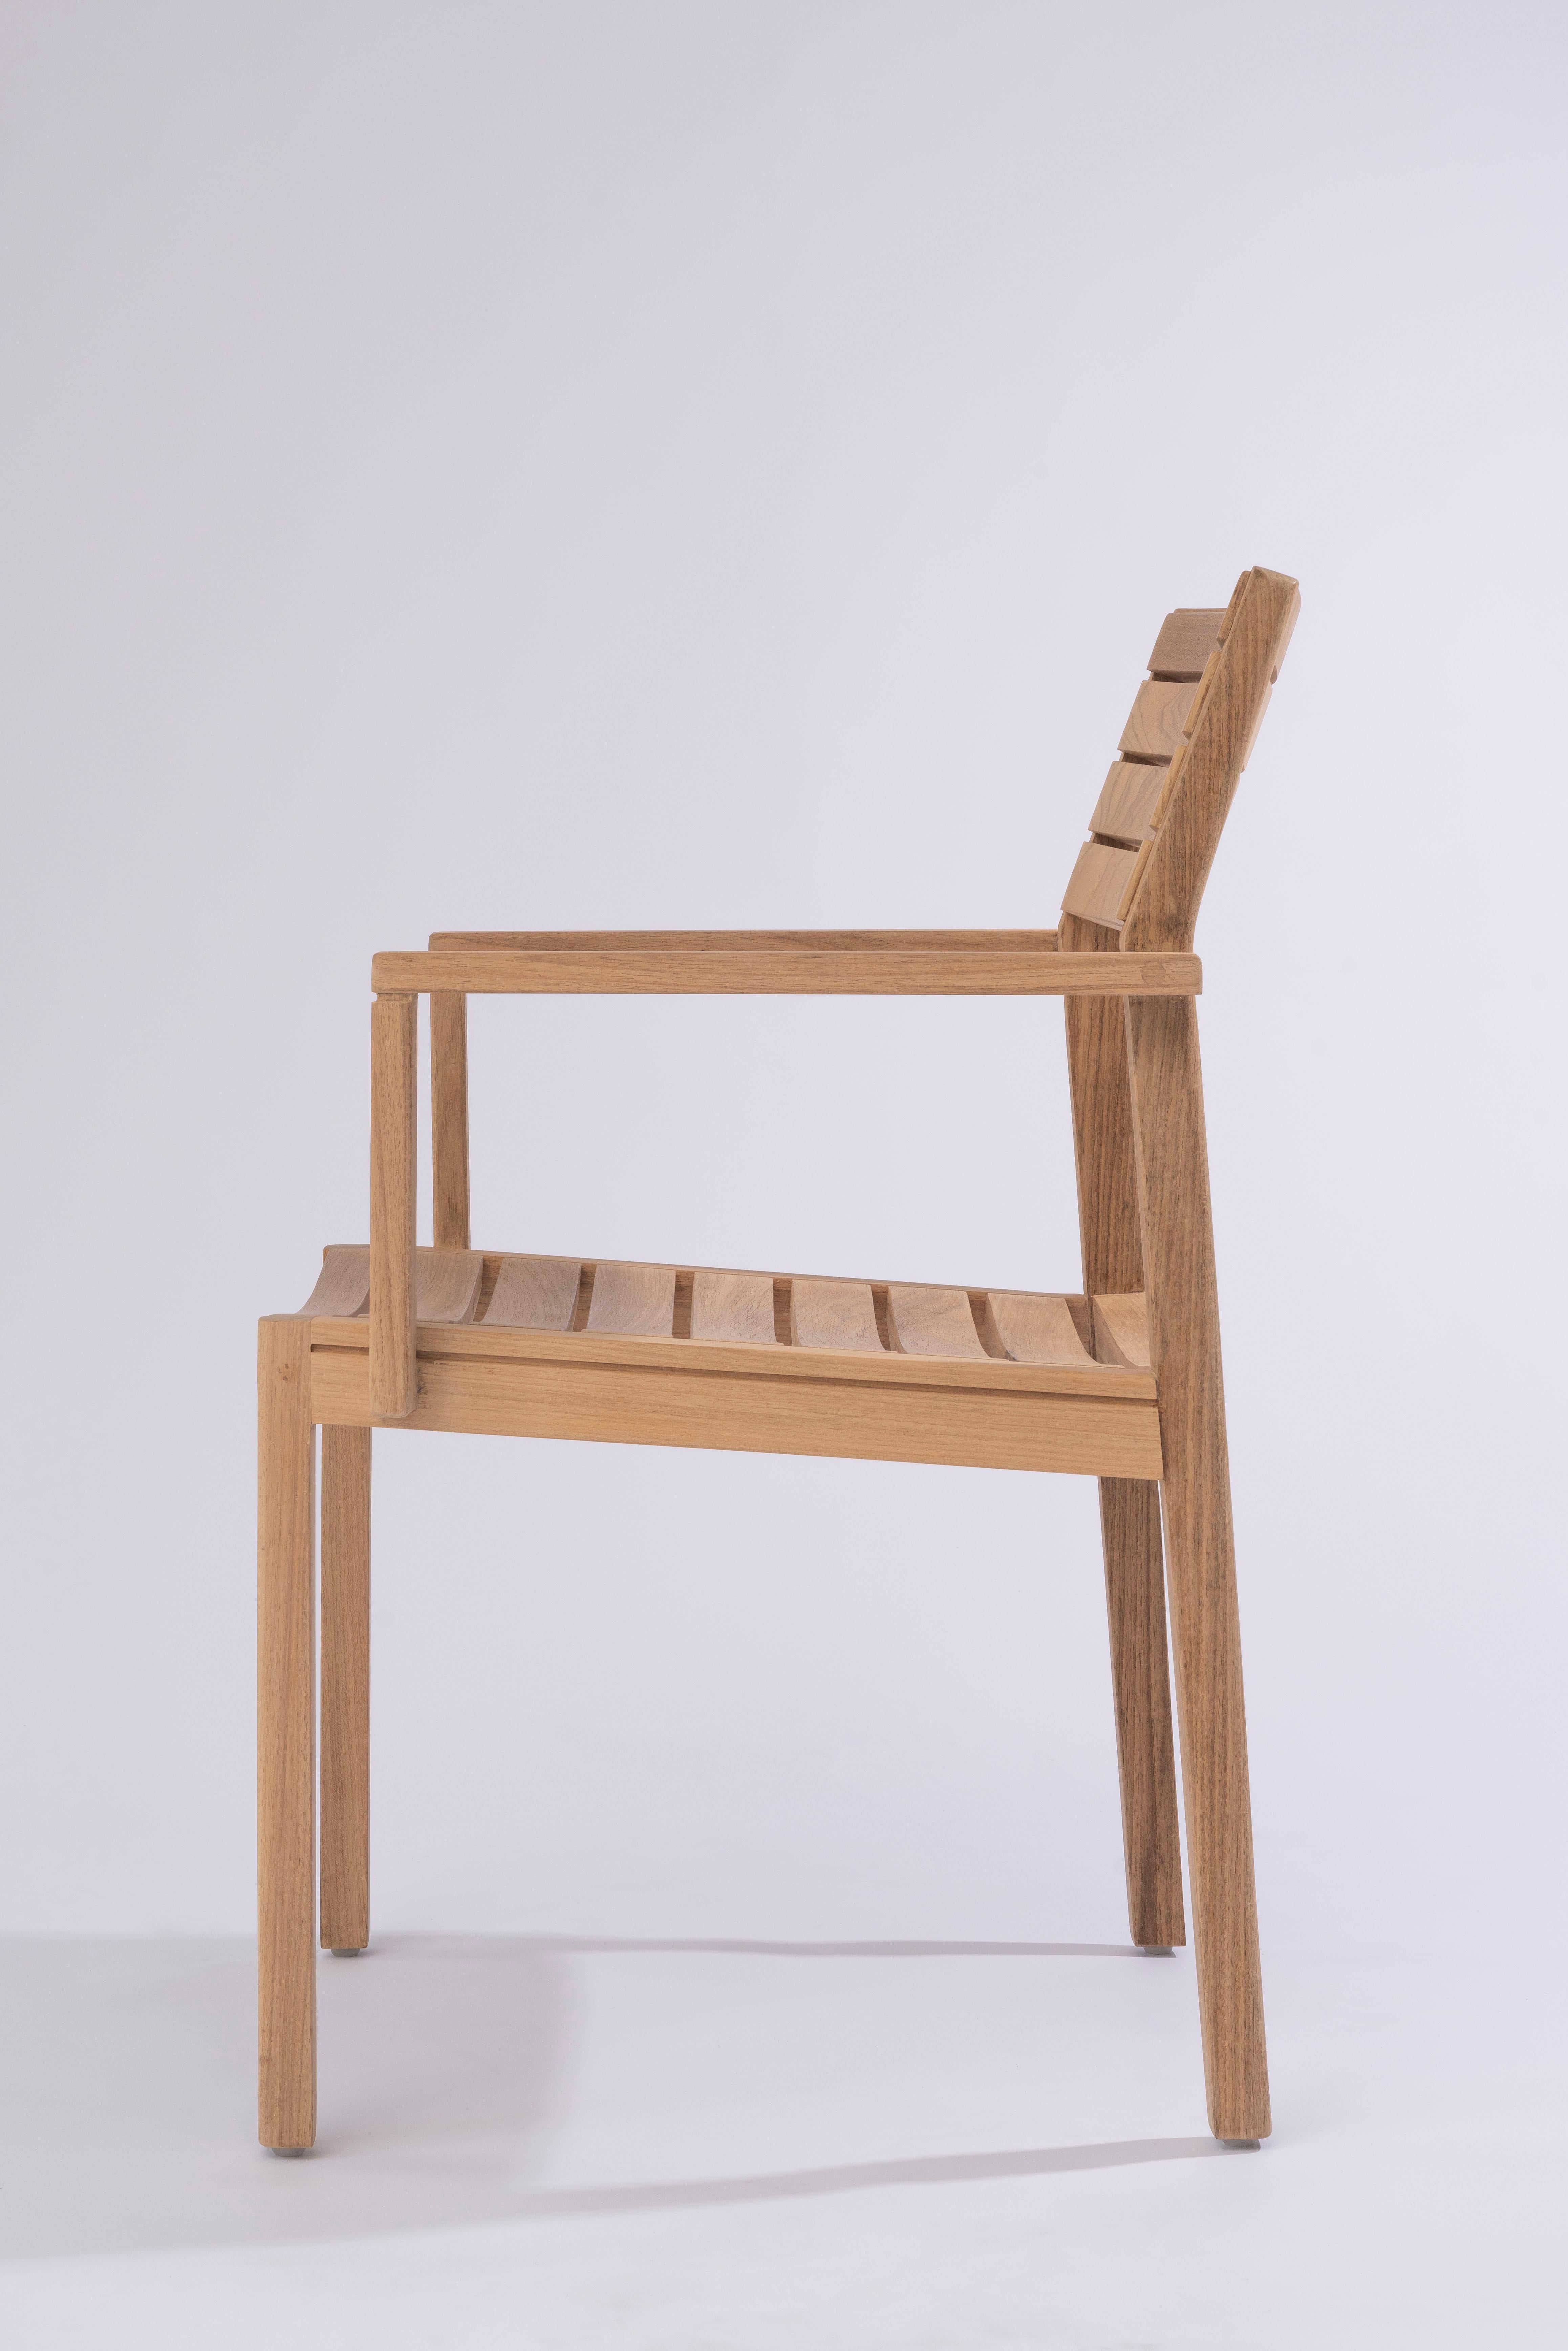 outdoor wood chairs with arms